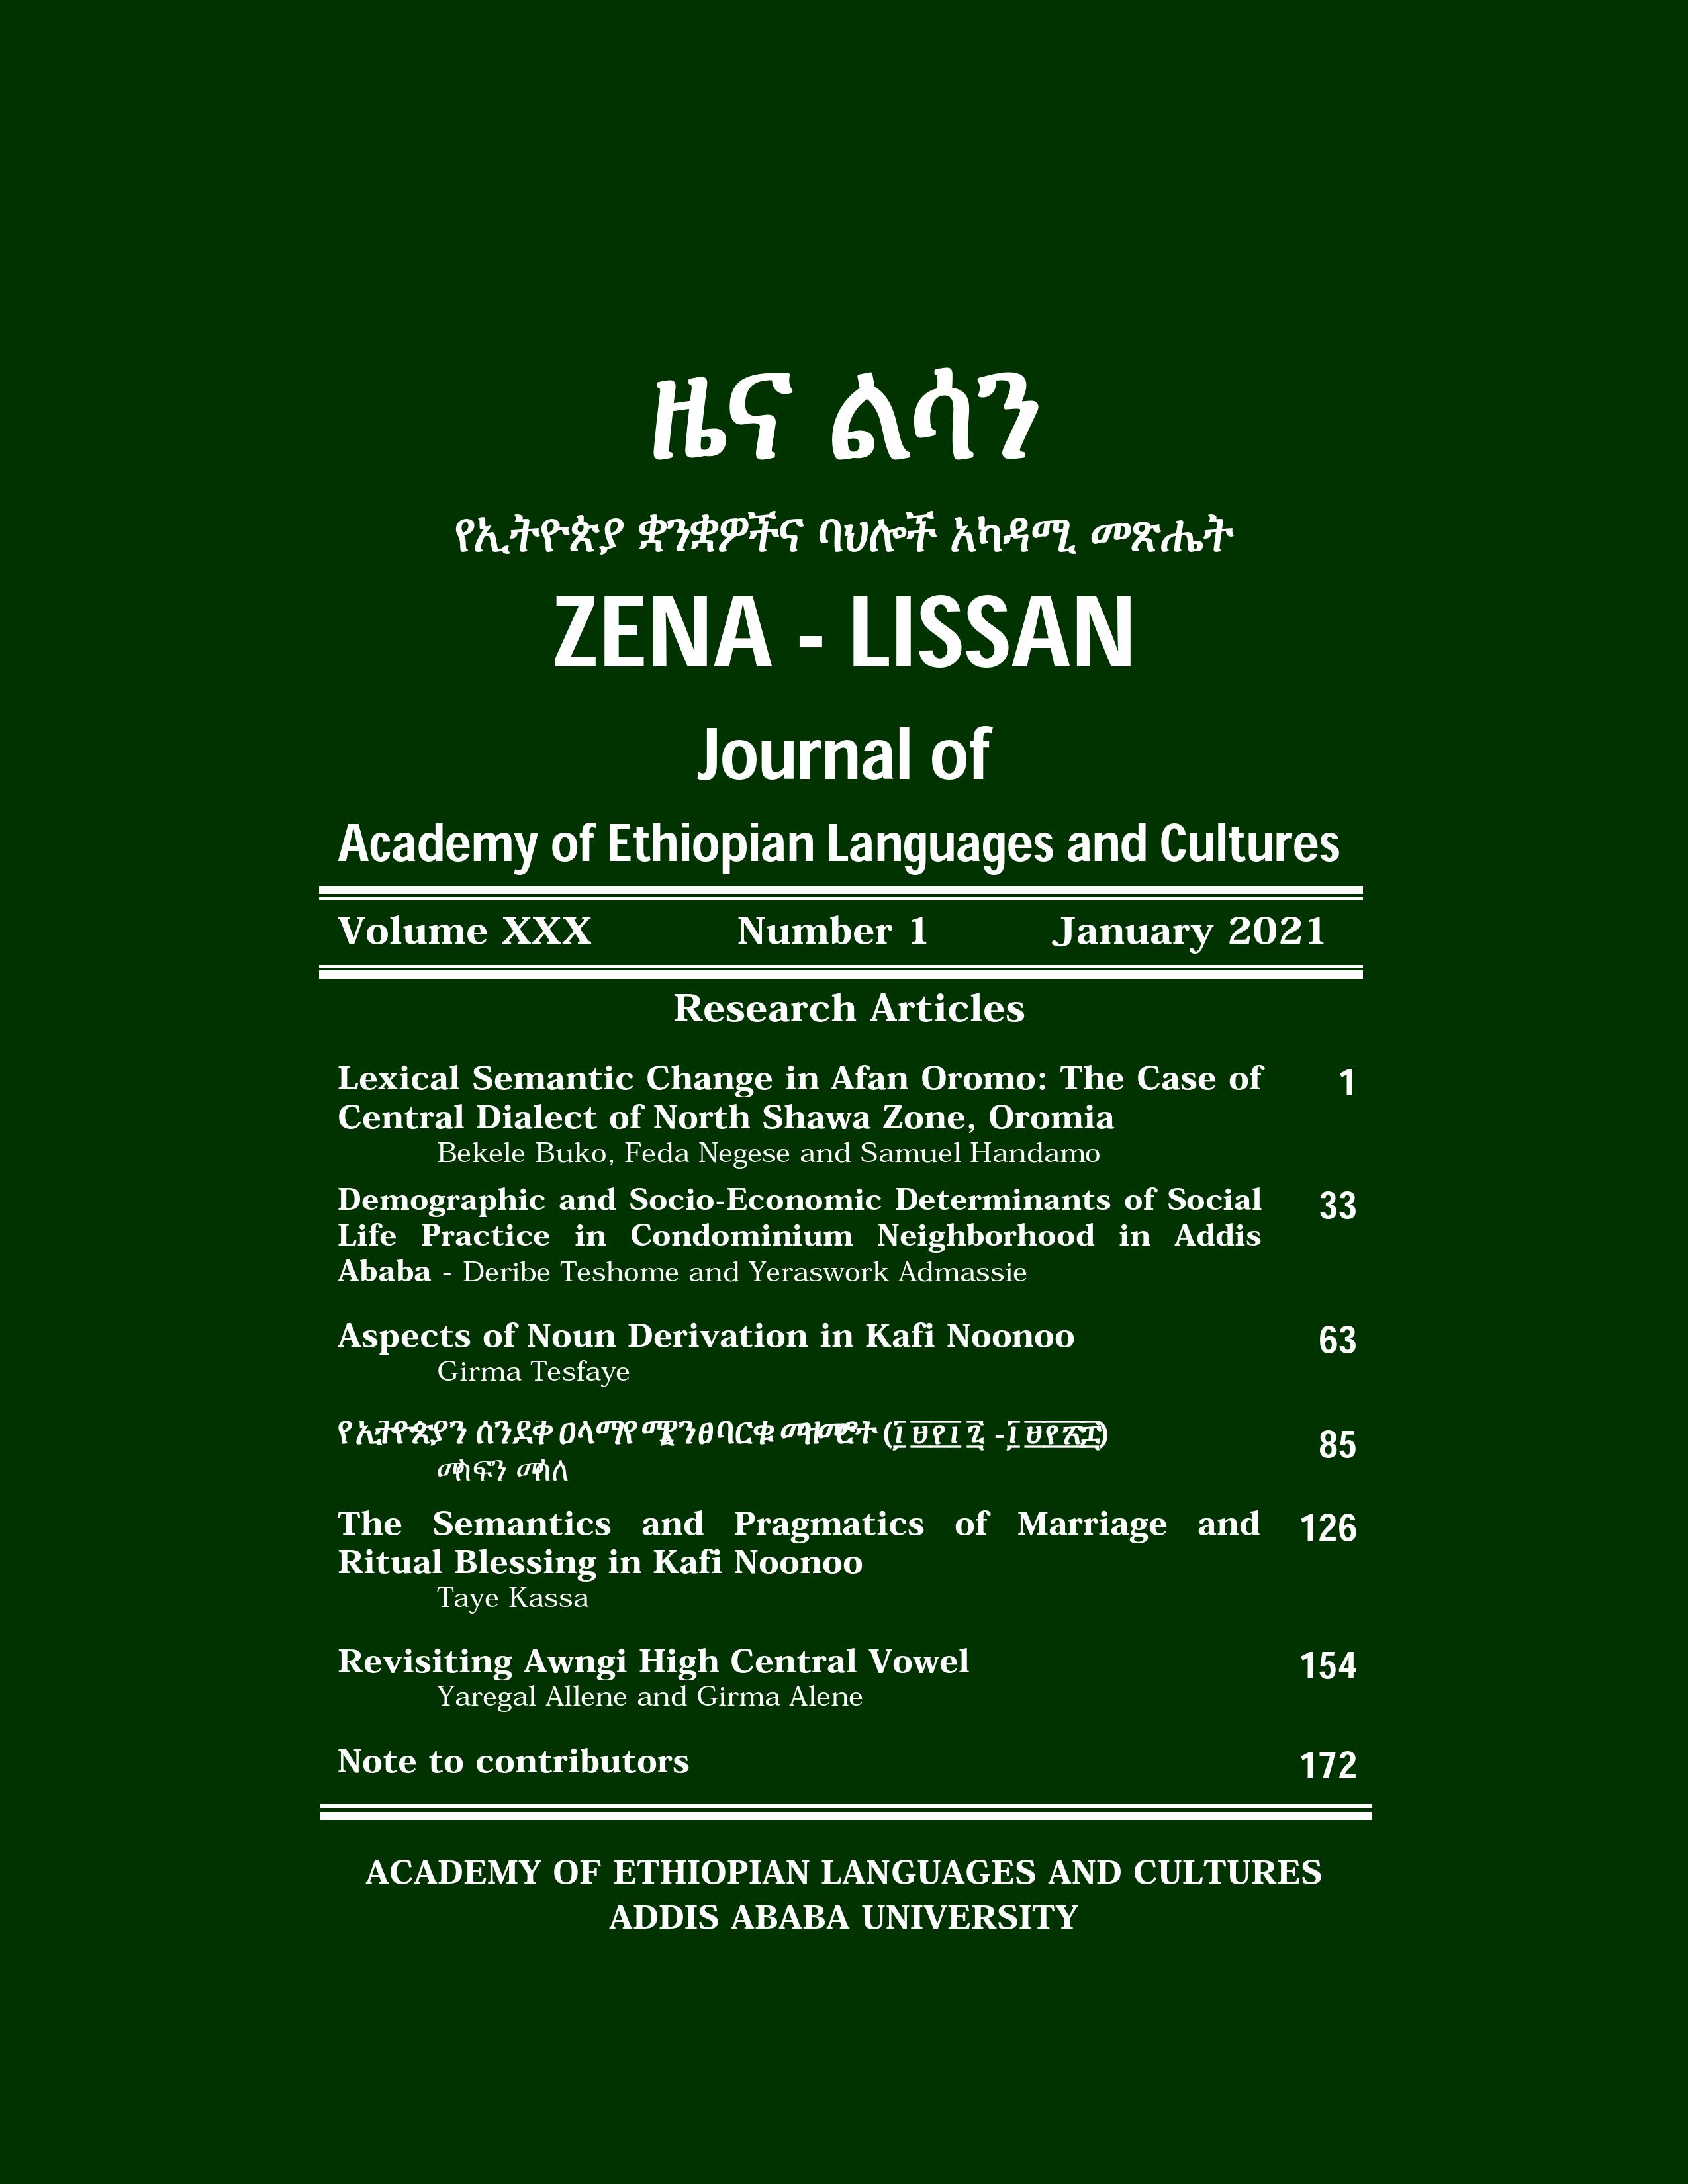 					View Vol. 30 No. 1 (2021): ZENA-LISSAN Journal of Ethiopian Languages and Cultures
				